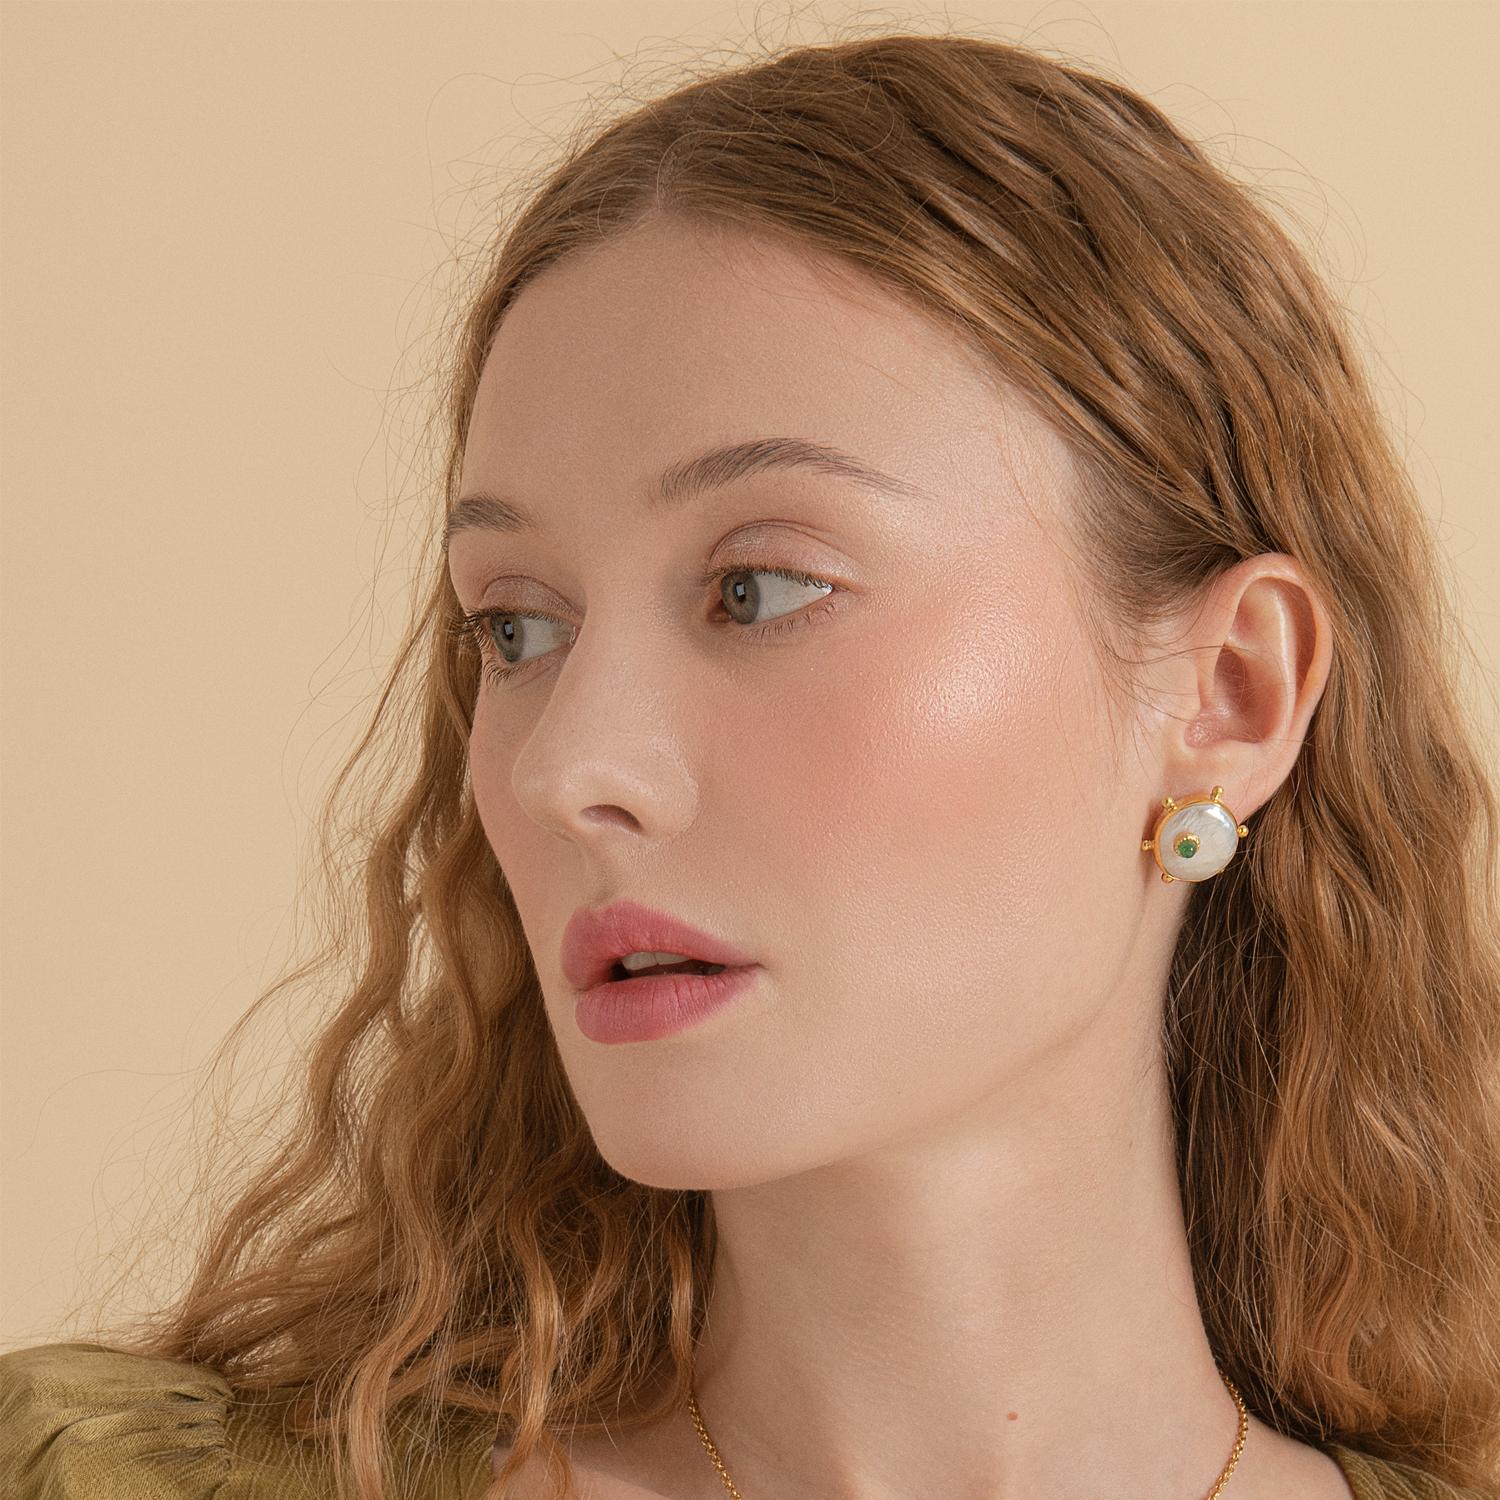 These 'Rebel Rebel' stud earrings by Vintouch are named so to pay homage to the famous David Bowie's song and explore the role of imperfection in today's instagrammed pseudo-reality. They're handmade from 18-karat gold-plated silver and set with